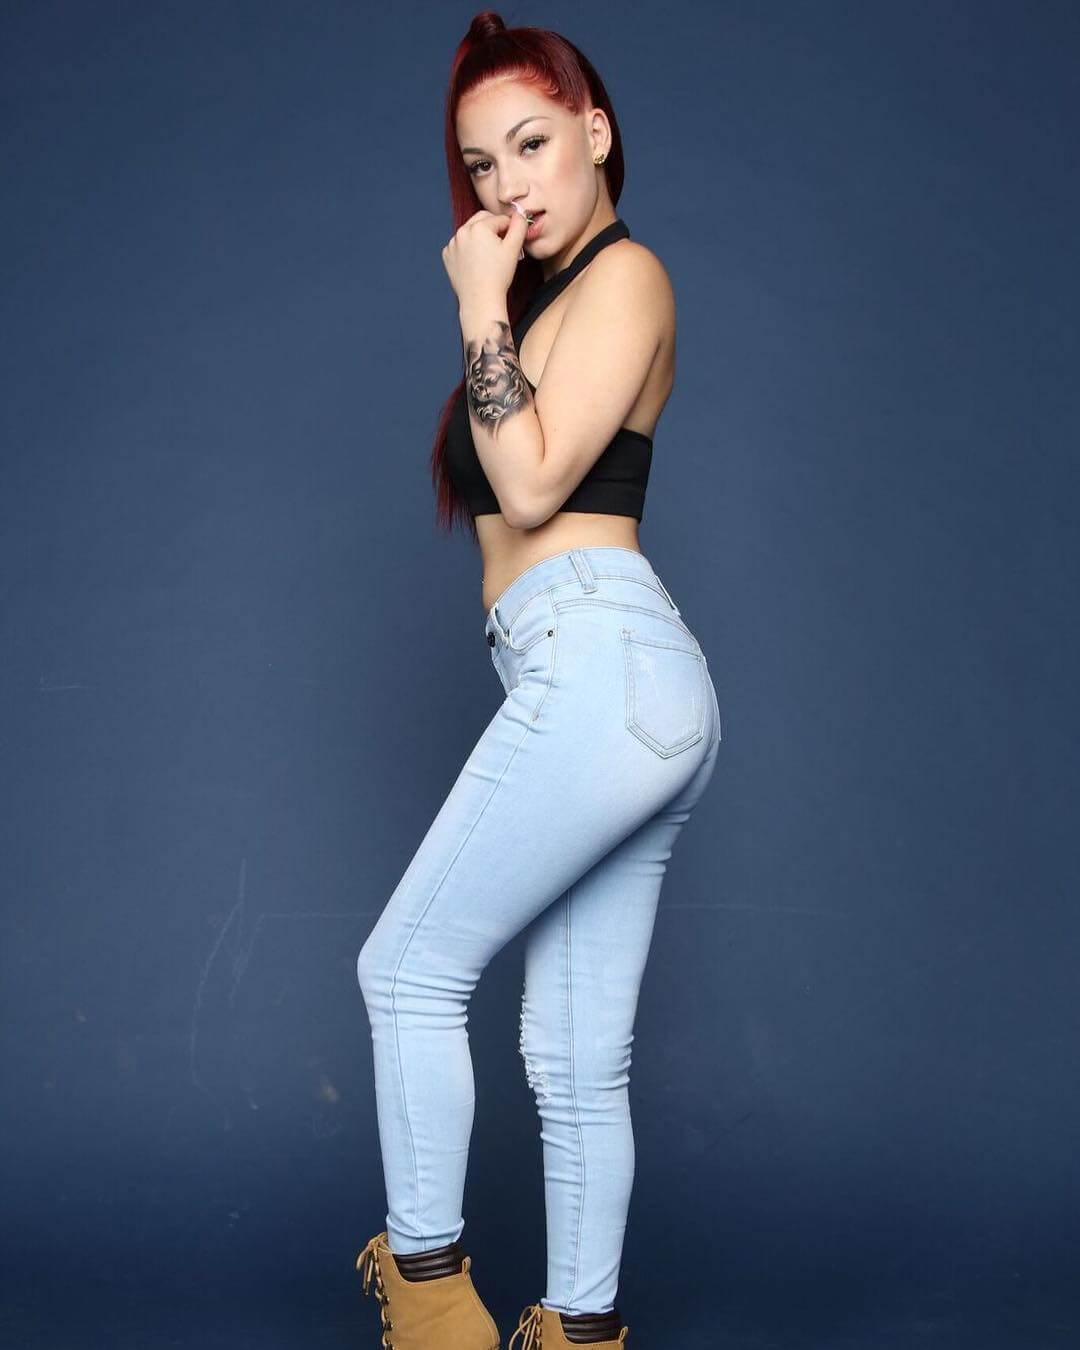 49 Hottest Bhad Bhabie Bikini Pictures Which Are Stunningly Ravishing | Best Of Comic Books